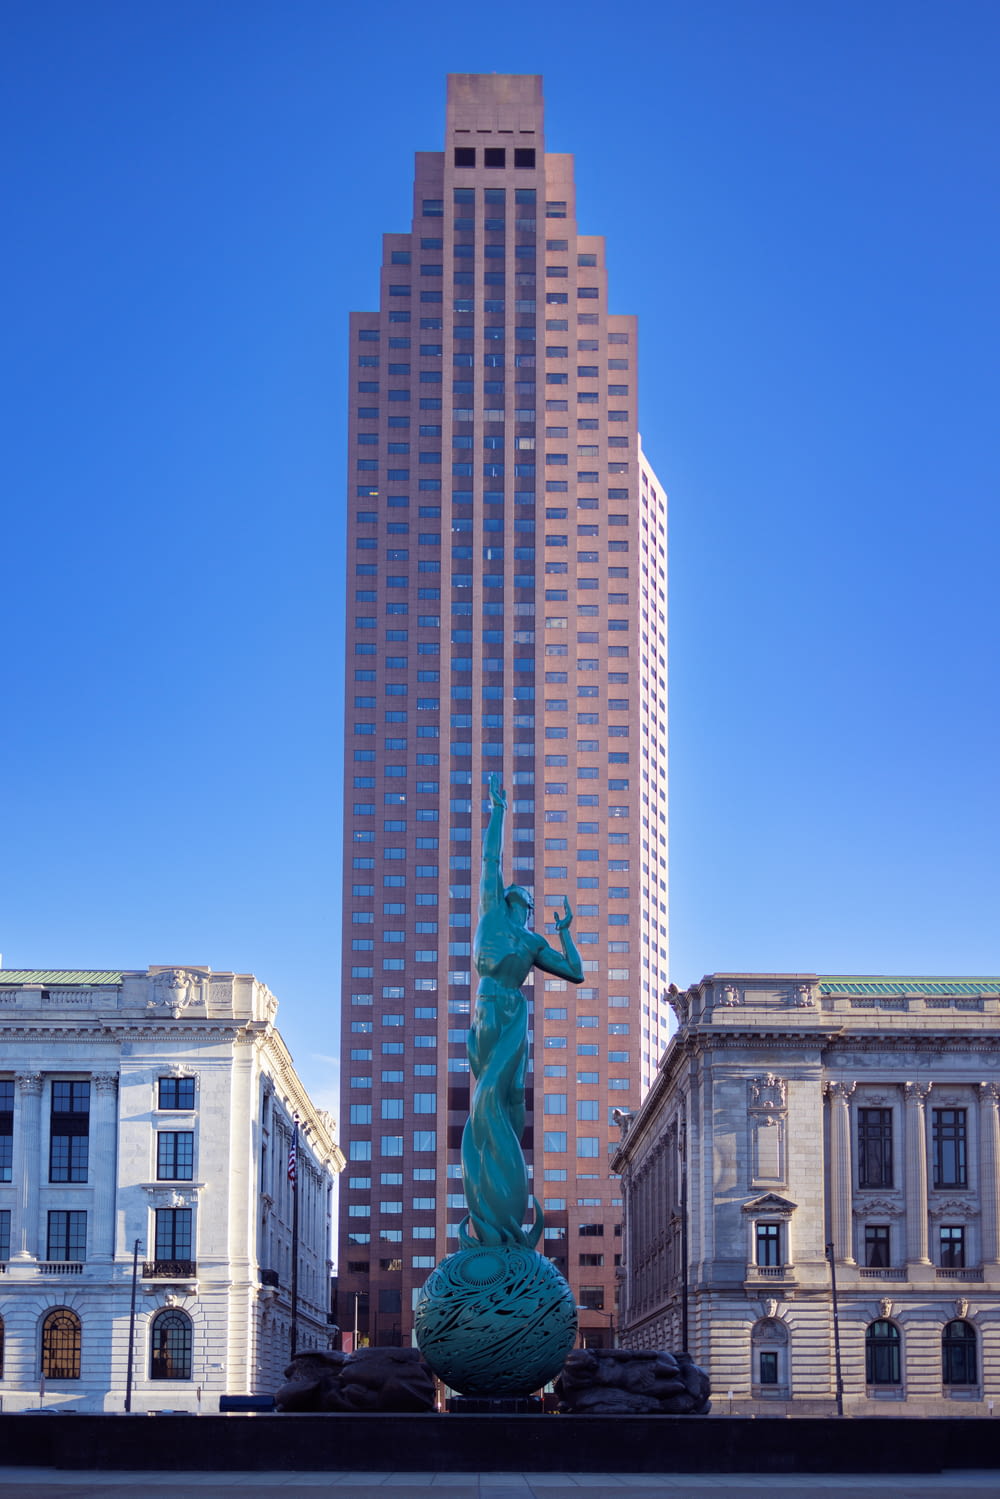 a statue of a horse in front of a tall building